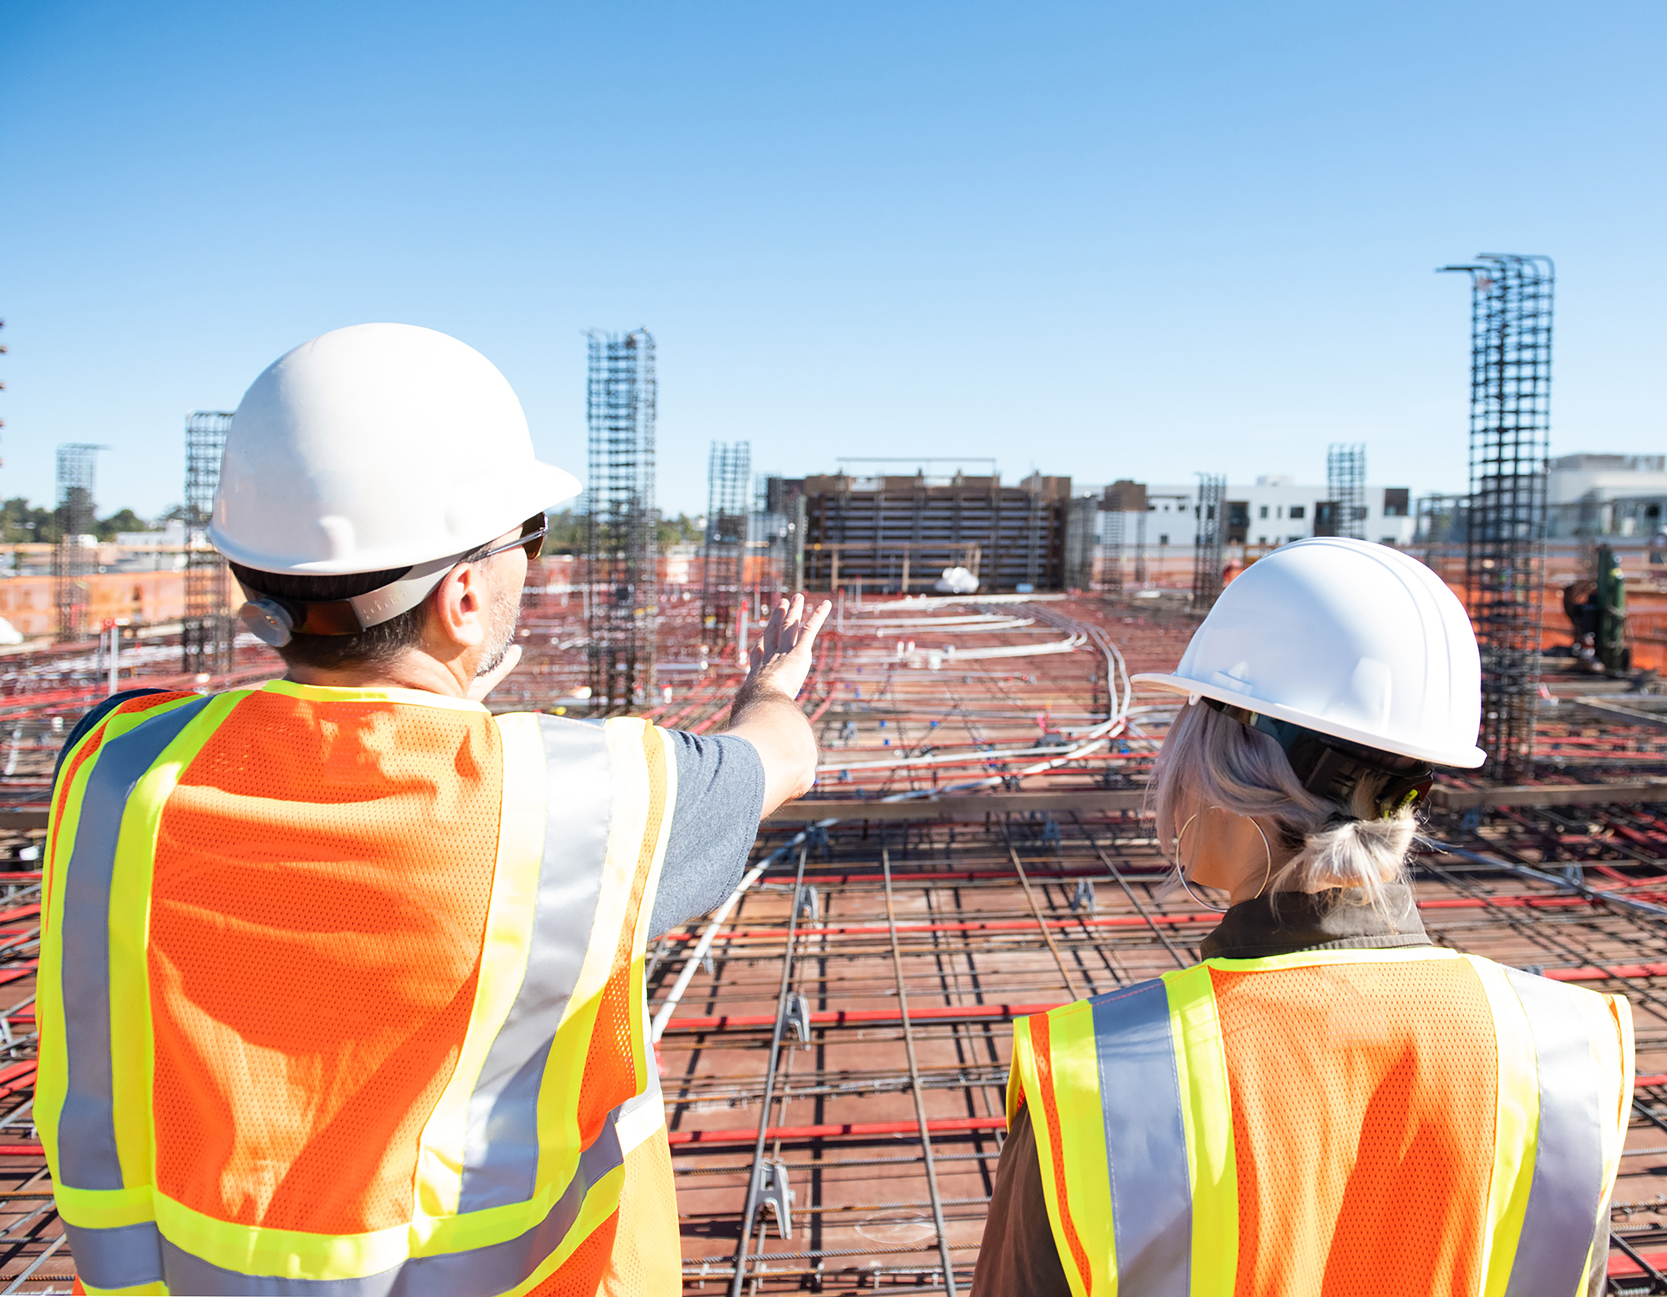 How does Construction Planning change across a project's life cycle?